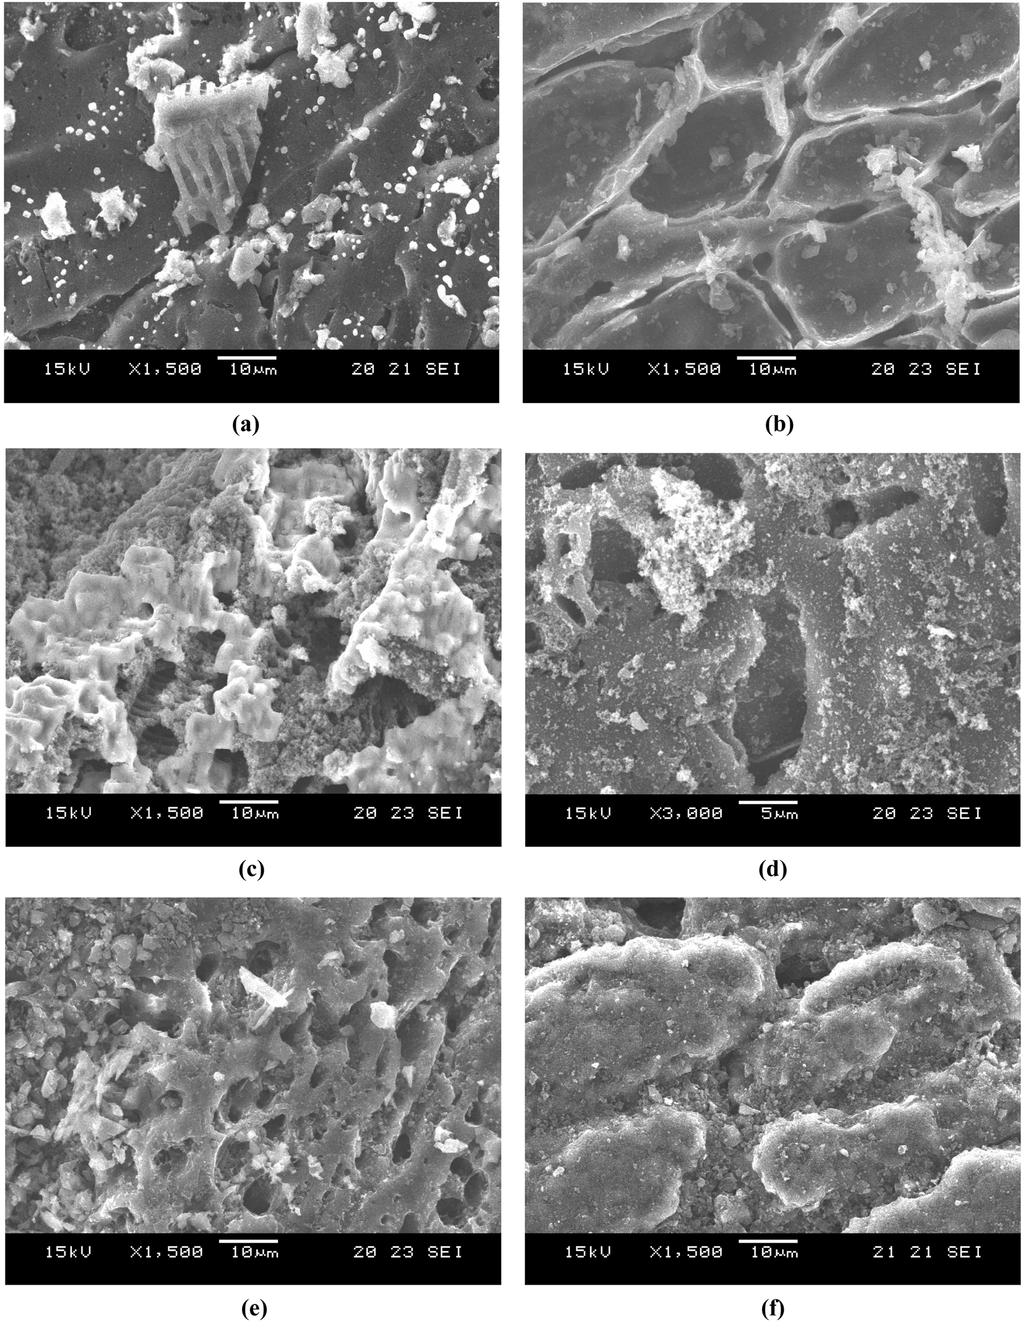 Characteristics of Surface Modified Activated Carbons Prepared by Potassium Salt Sequentially After Hydrochloric Acid Treatment 37 막으므로 인하여 미세동공 혹은 극미세 동공으로 변화한 것으 로 여겨진다.